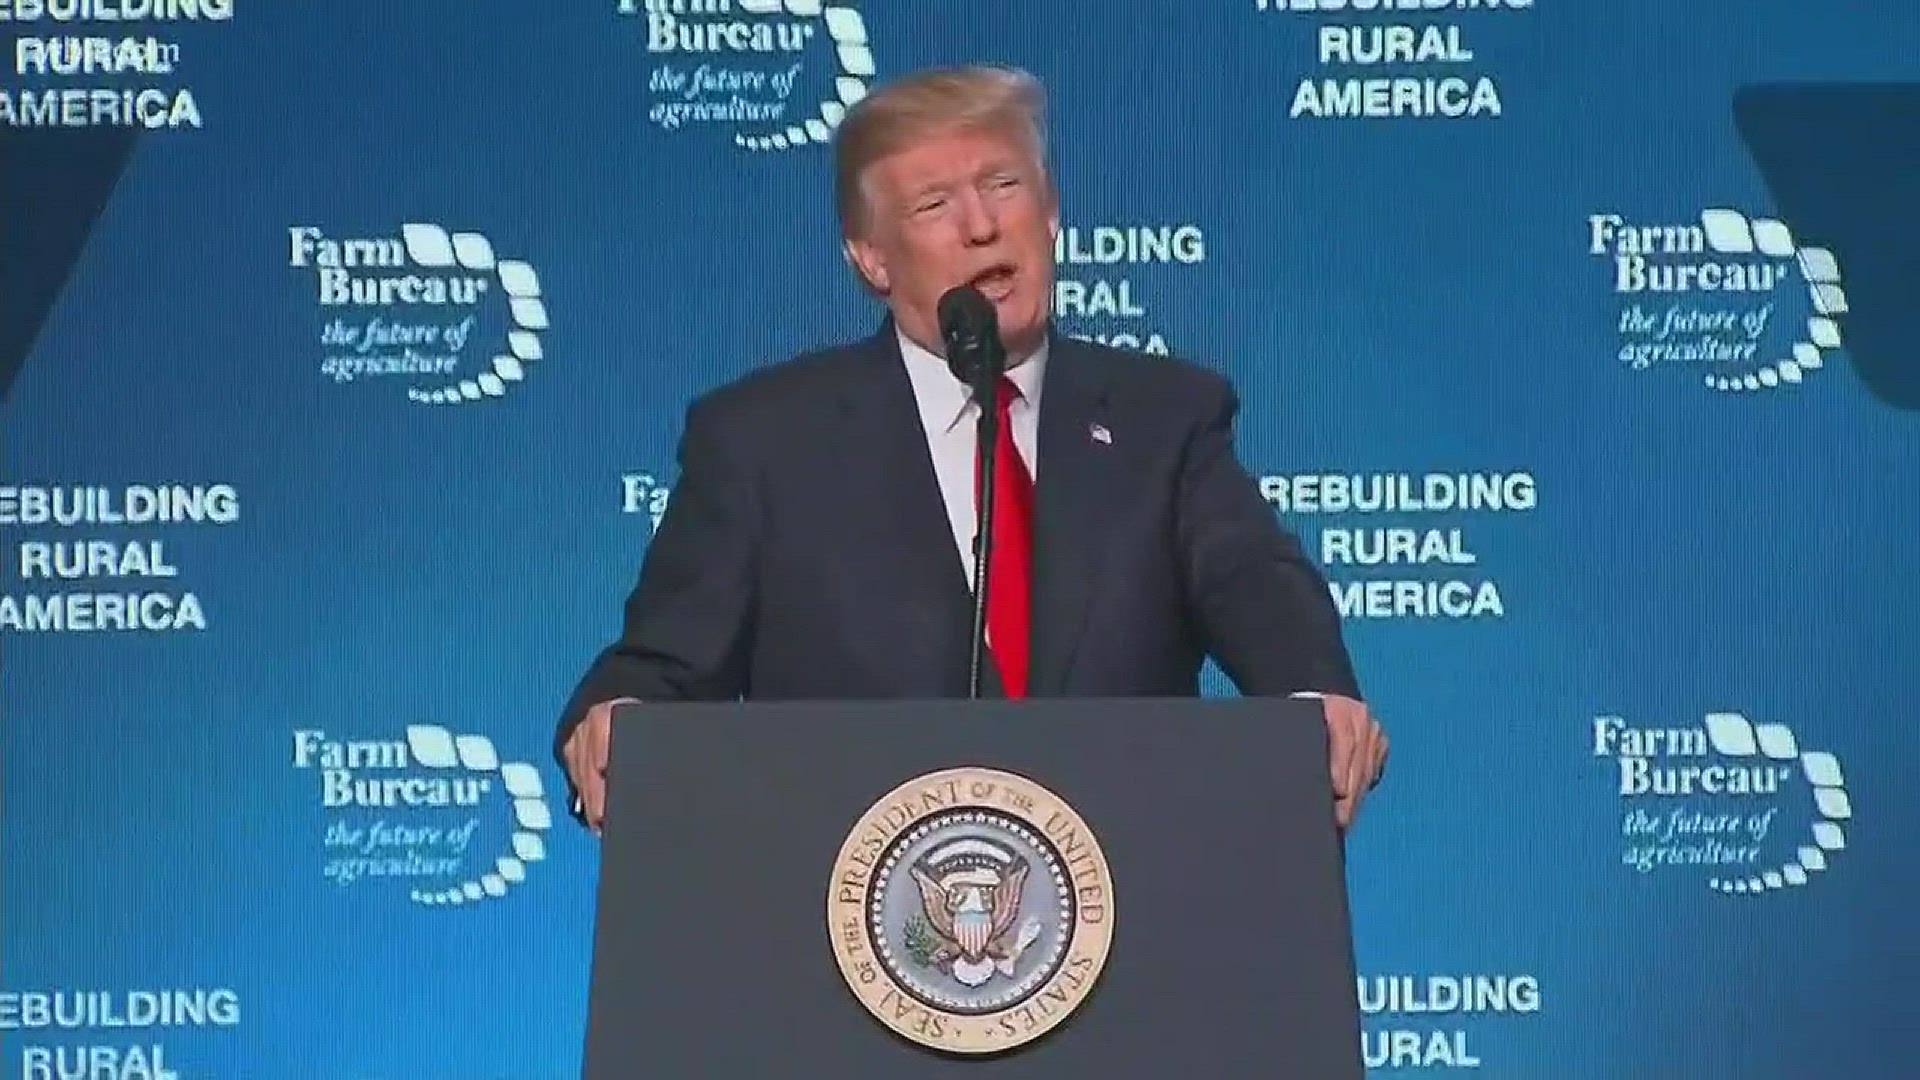 During a whirlwind trip to Nashville, President Donald Trump on Monday signed an executive order aimed at promoting the expansion of broadband internet into rural areas that lack connectivity.